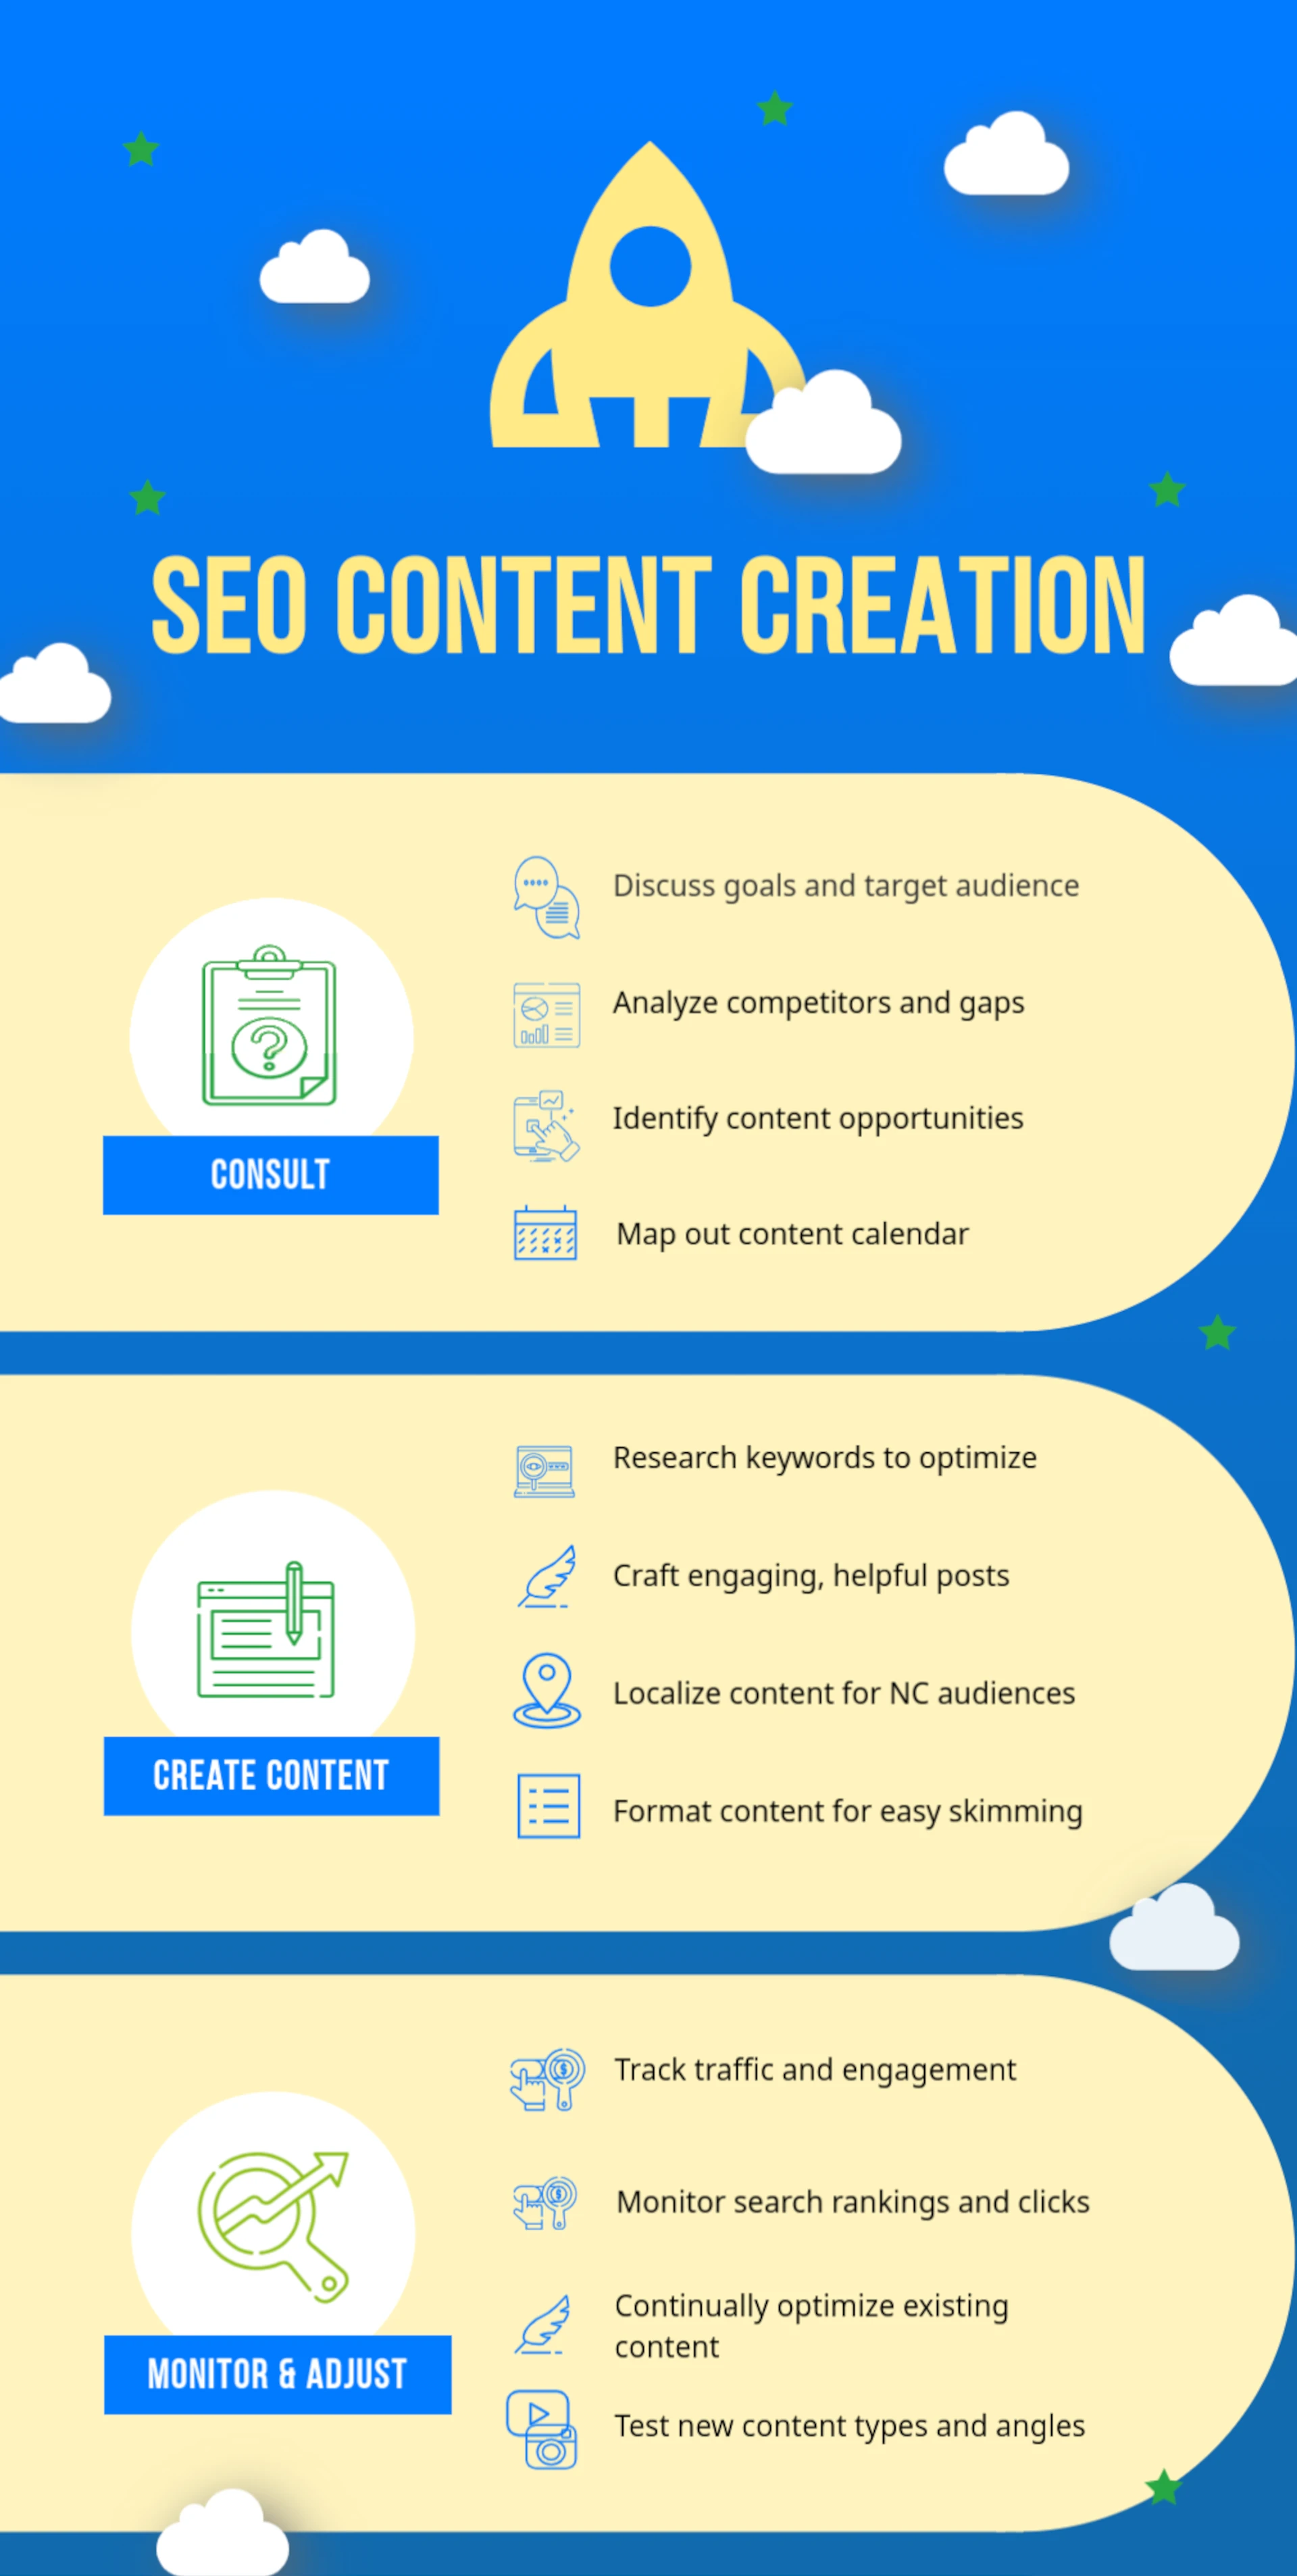 An infographic outlining the RankPDQ SEO Content Creation process